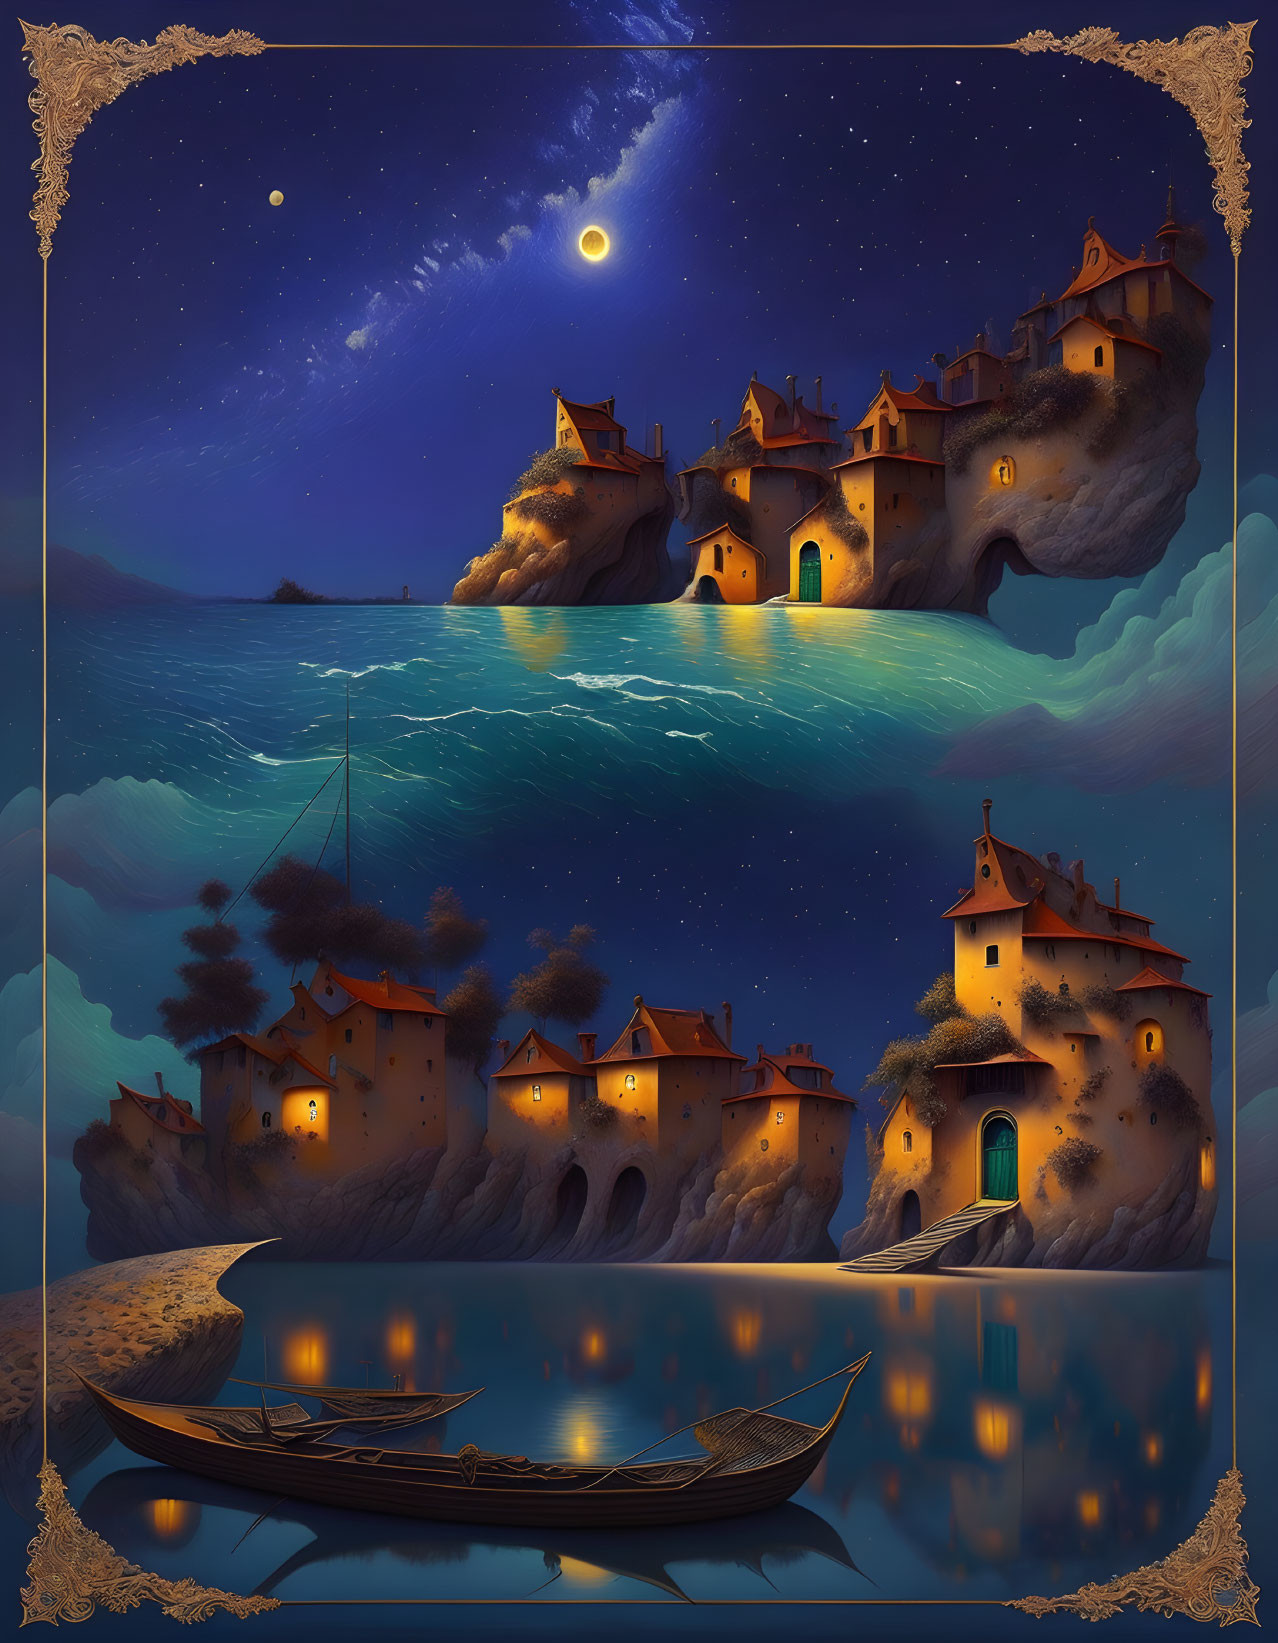 Illuminated Cliff Houses Overlooking Tranquil Sea